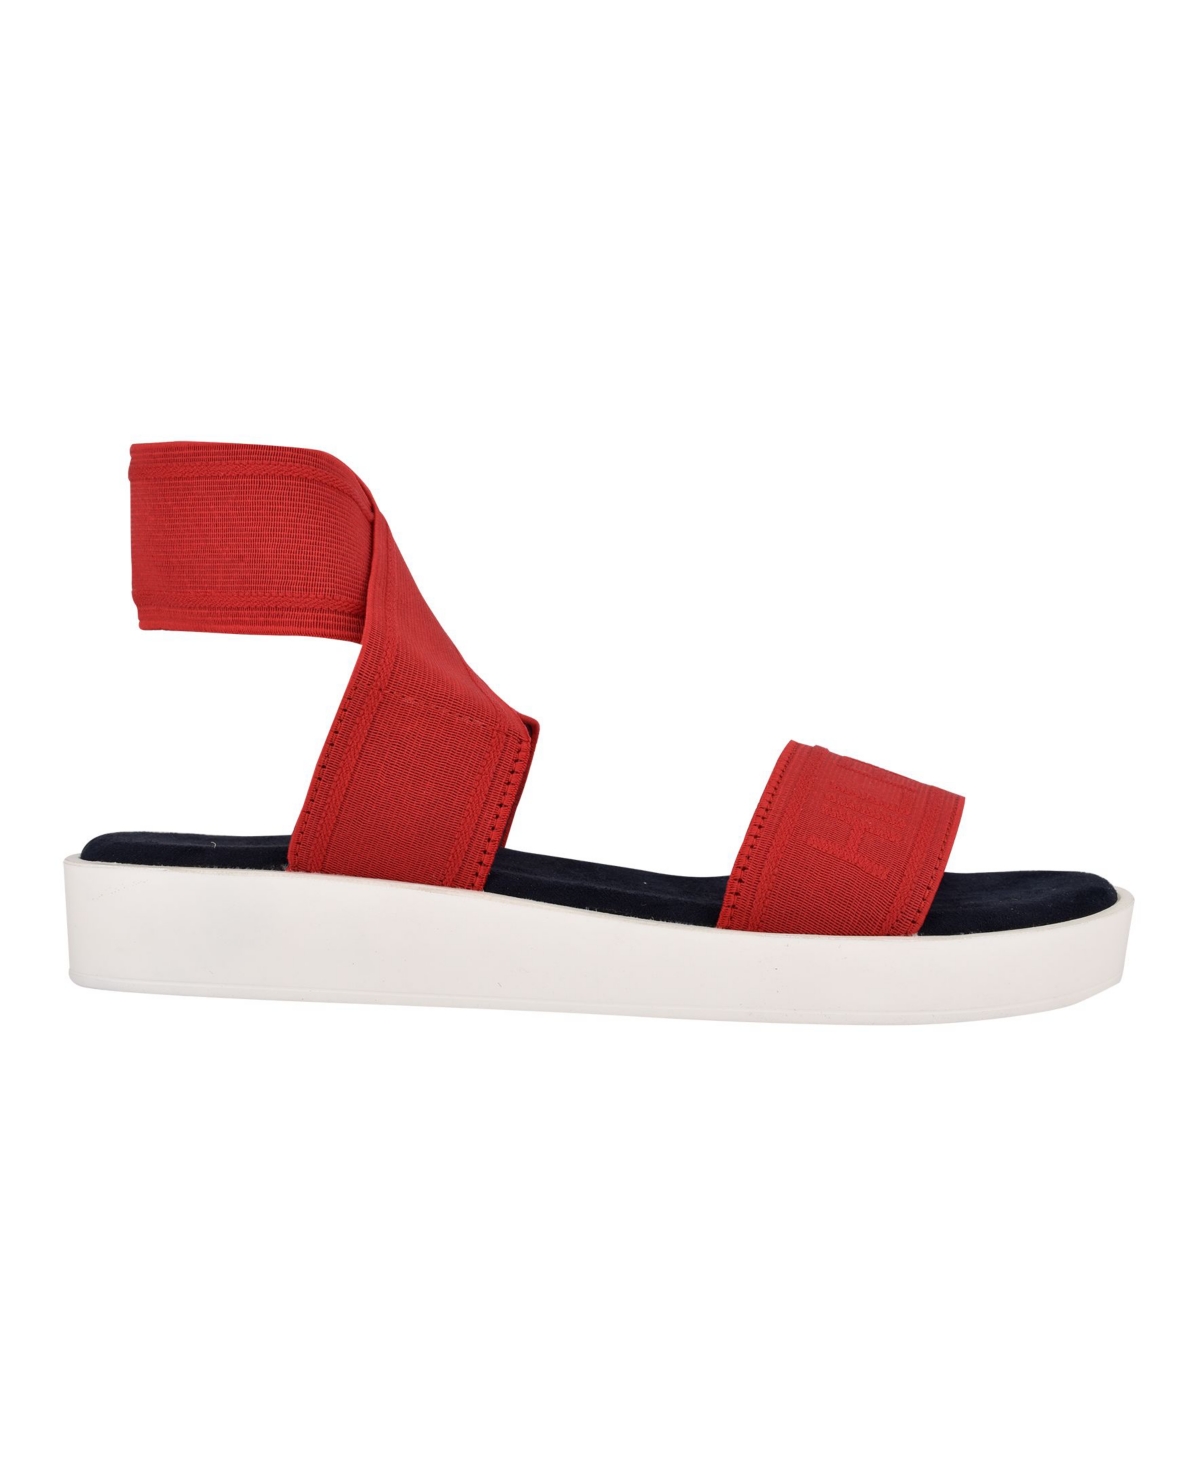 UPC 195182659457 product image for Tommy Hilfiger Women's Springi Stretch Ankle Wrap Sandals Women's Shoes | upcitemdb.com